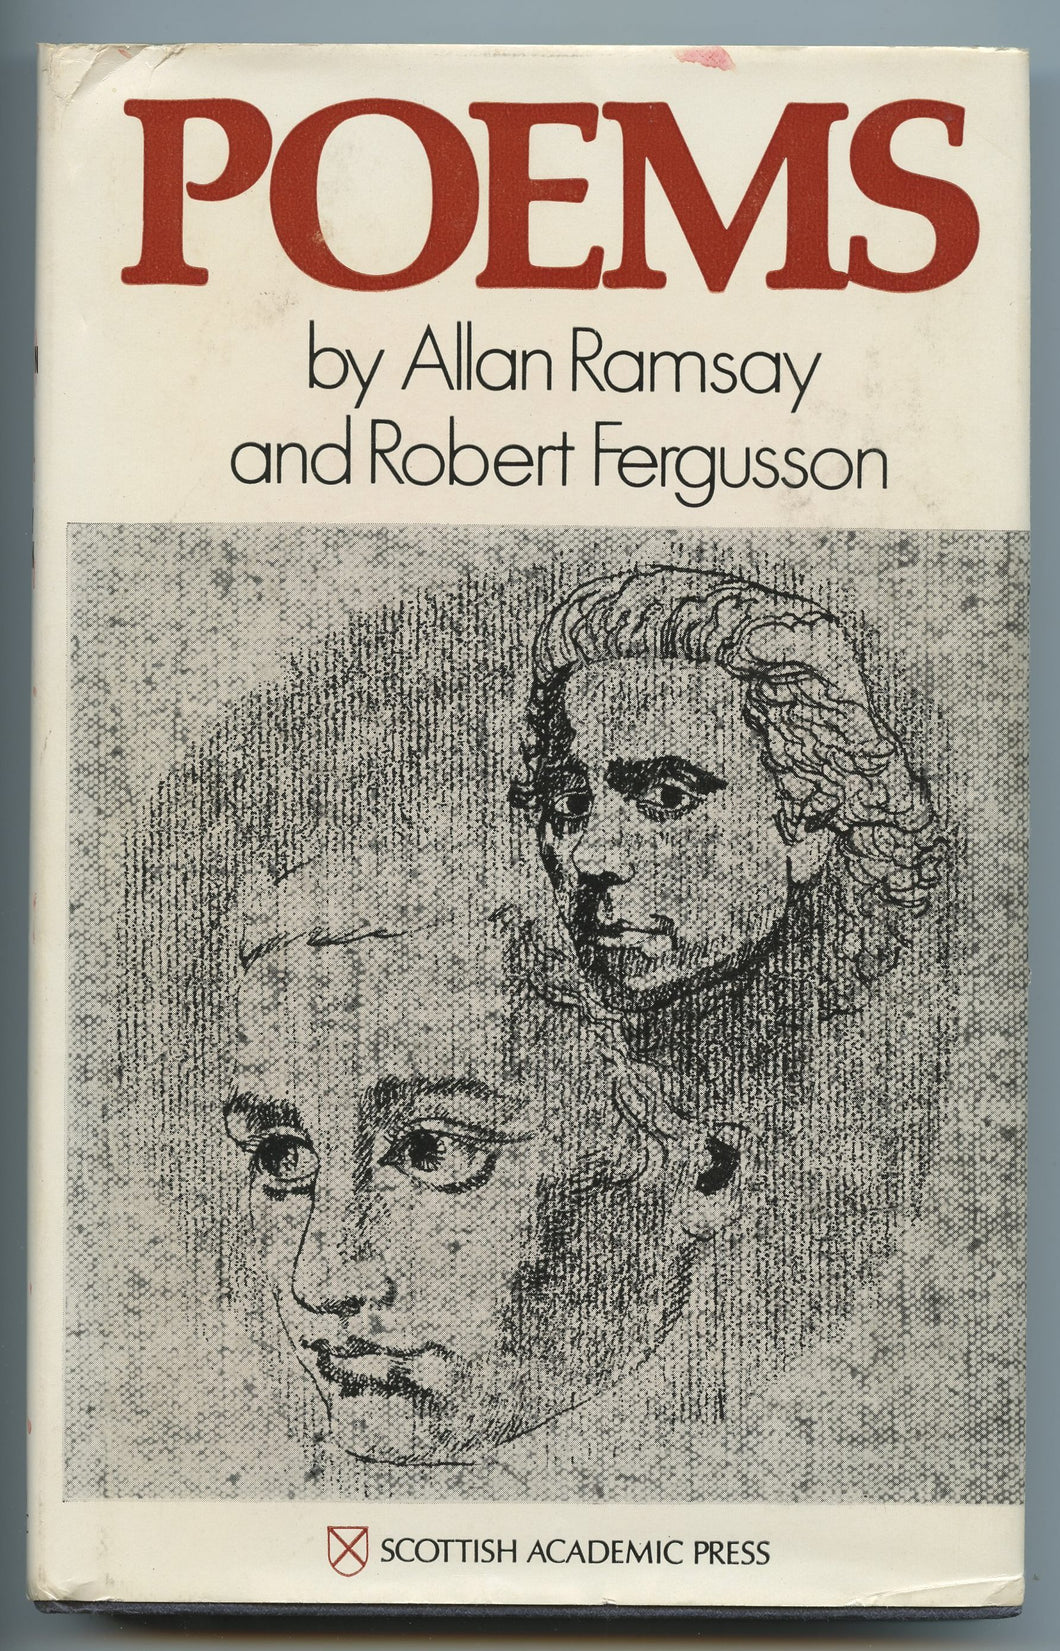 Poems by Allan Ramsay and Robert Fergusson 